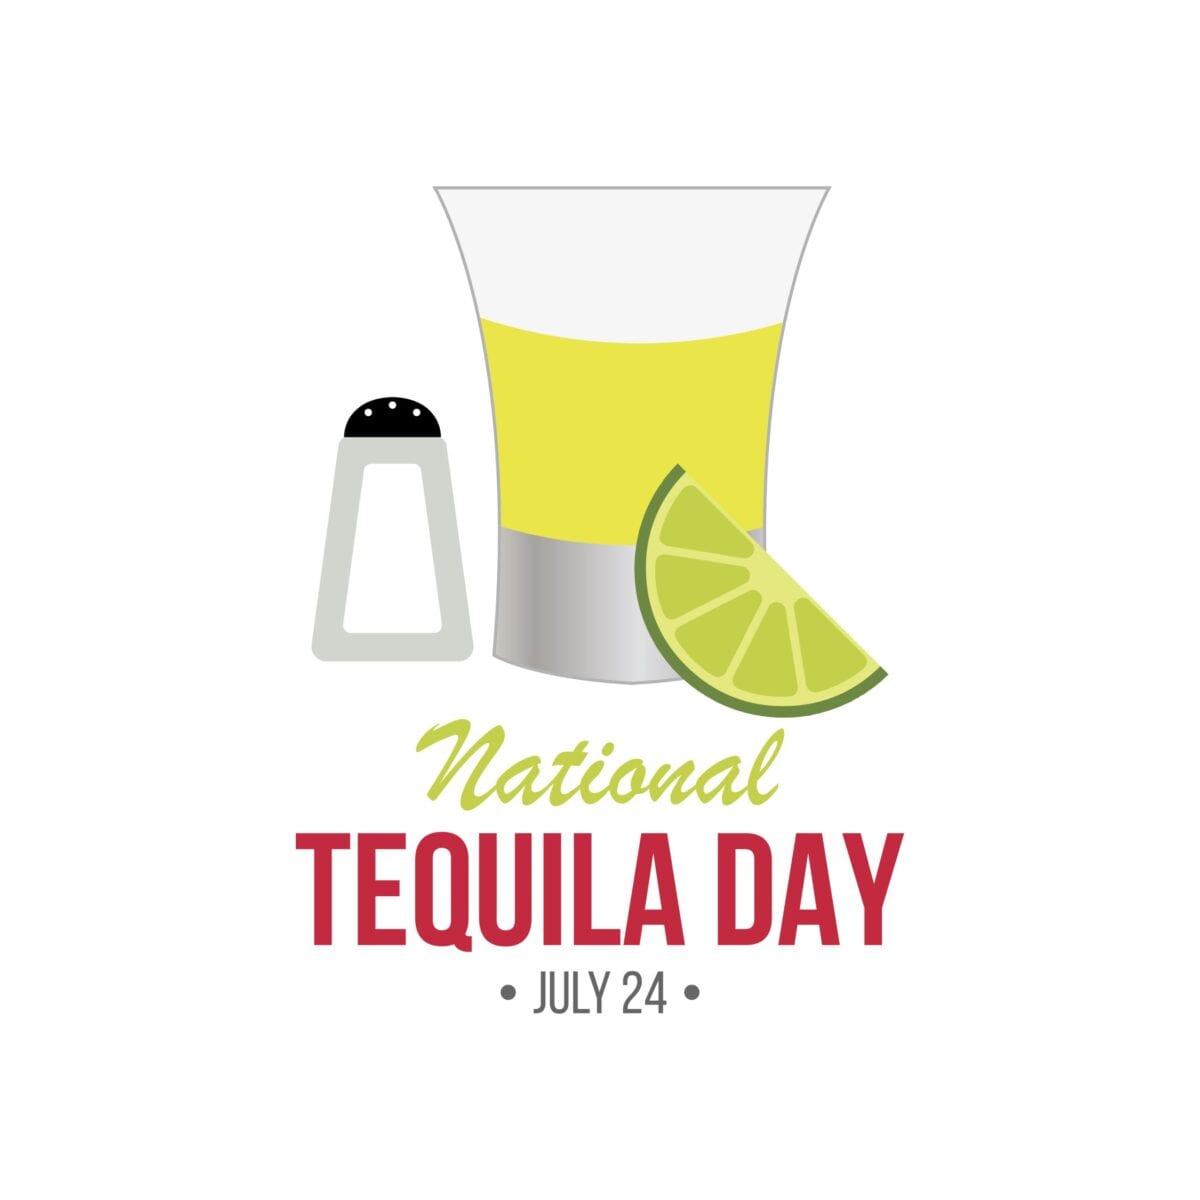 Today Is National Tequila Day. Here's Where You Can Get Discounted